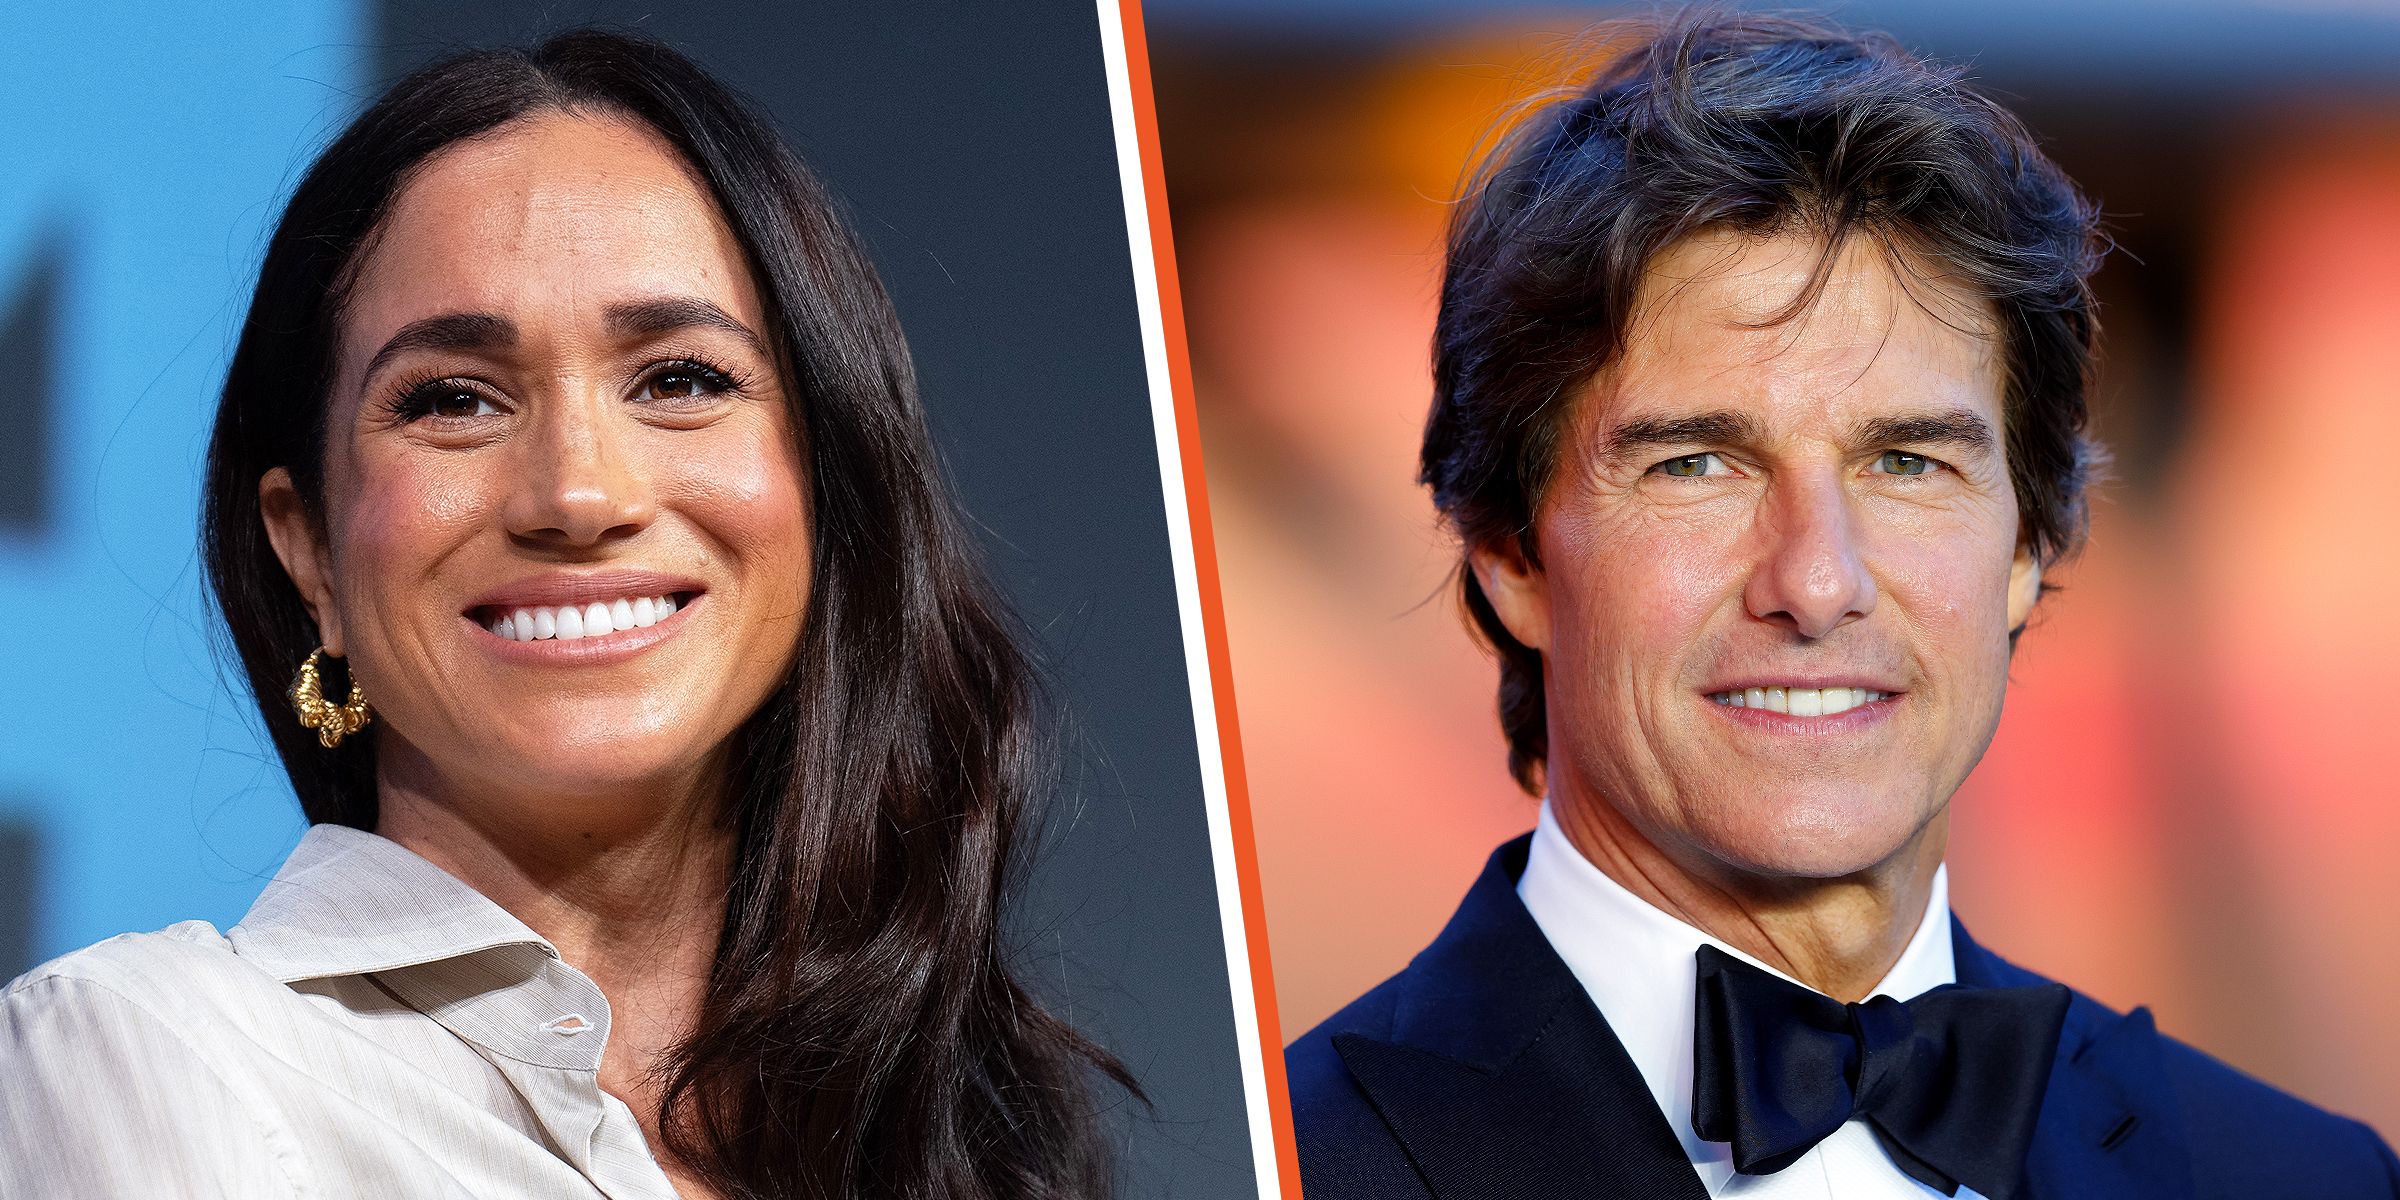 Meghan Markle and Tom Cruise | Source: Getty Images